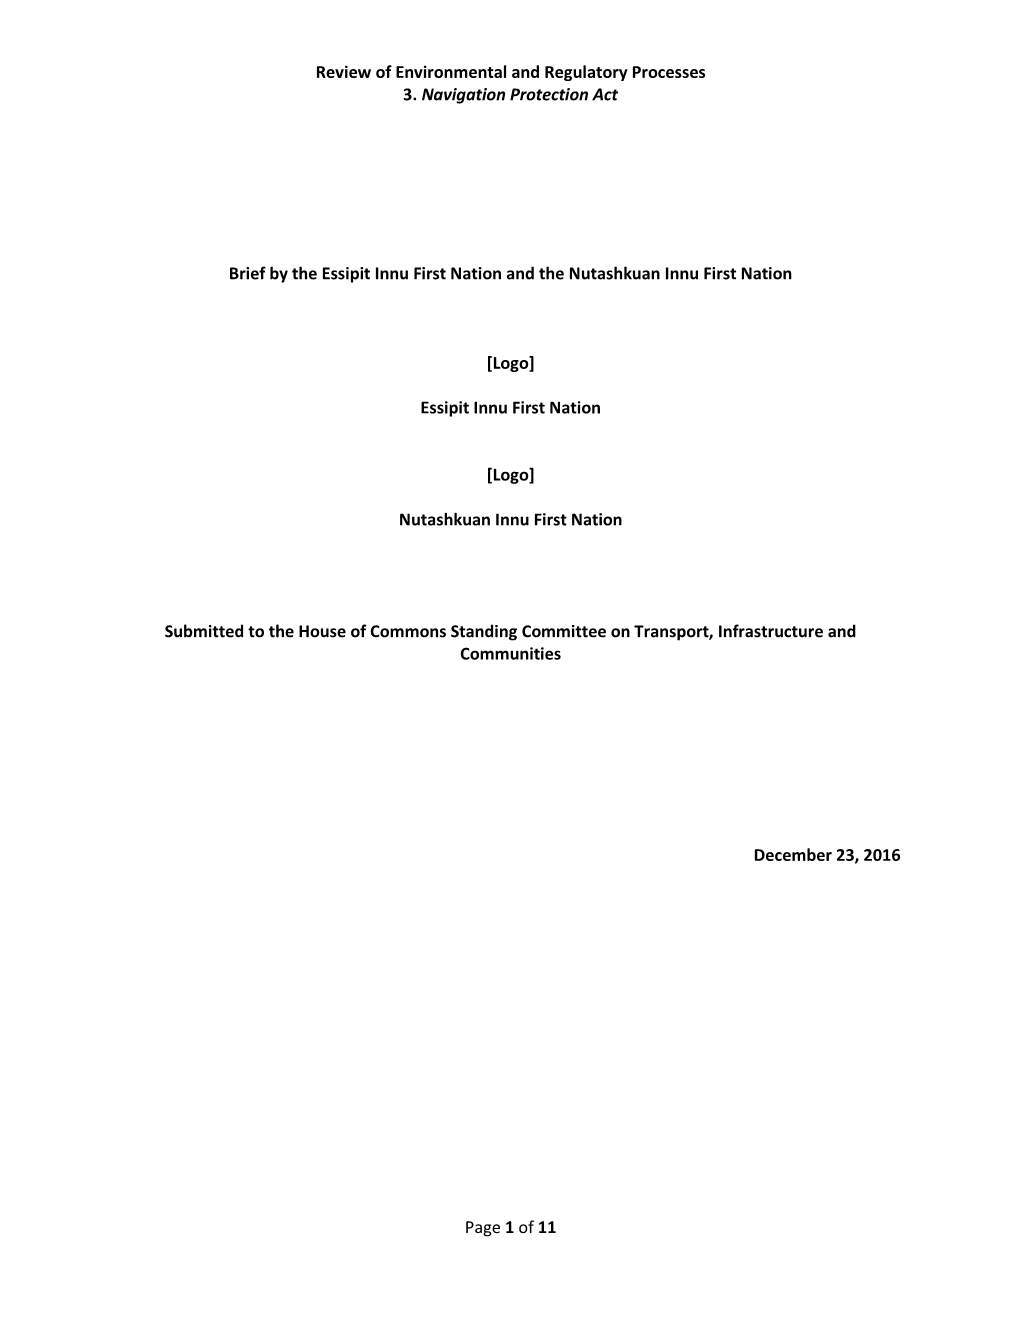 Review of Environmental and Regulatory Processes 3. Navigation Protection Act Page 1 of 11 Brief by the Essipit Innu First Natio